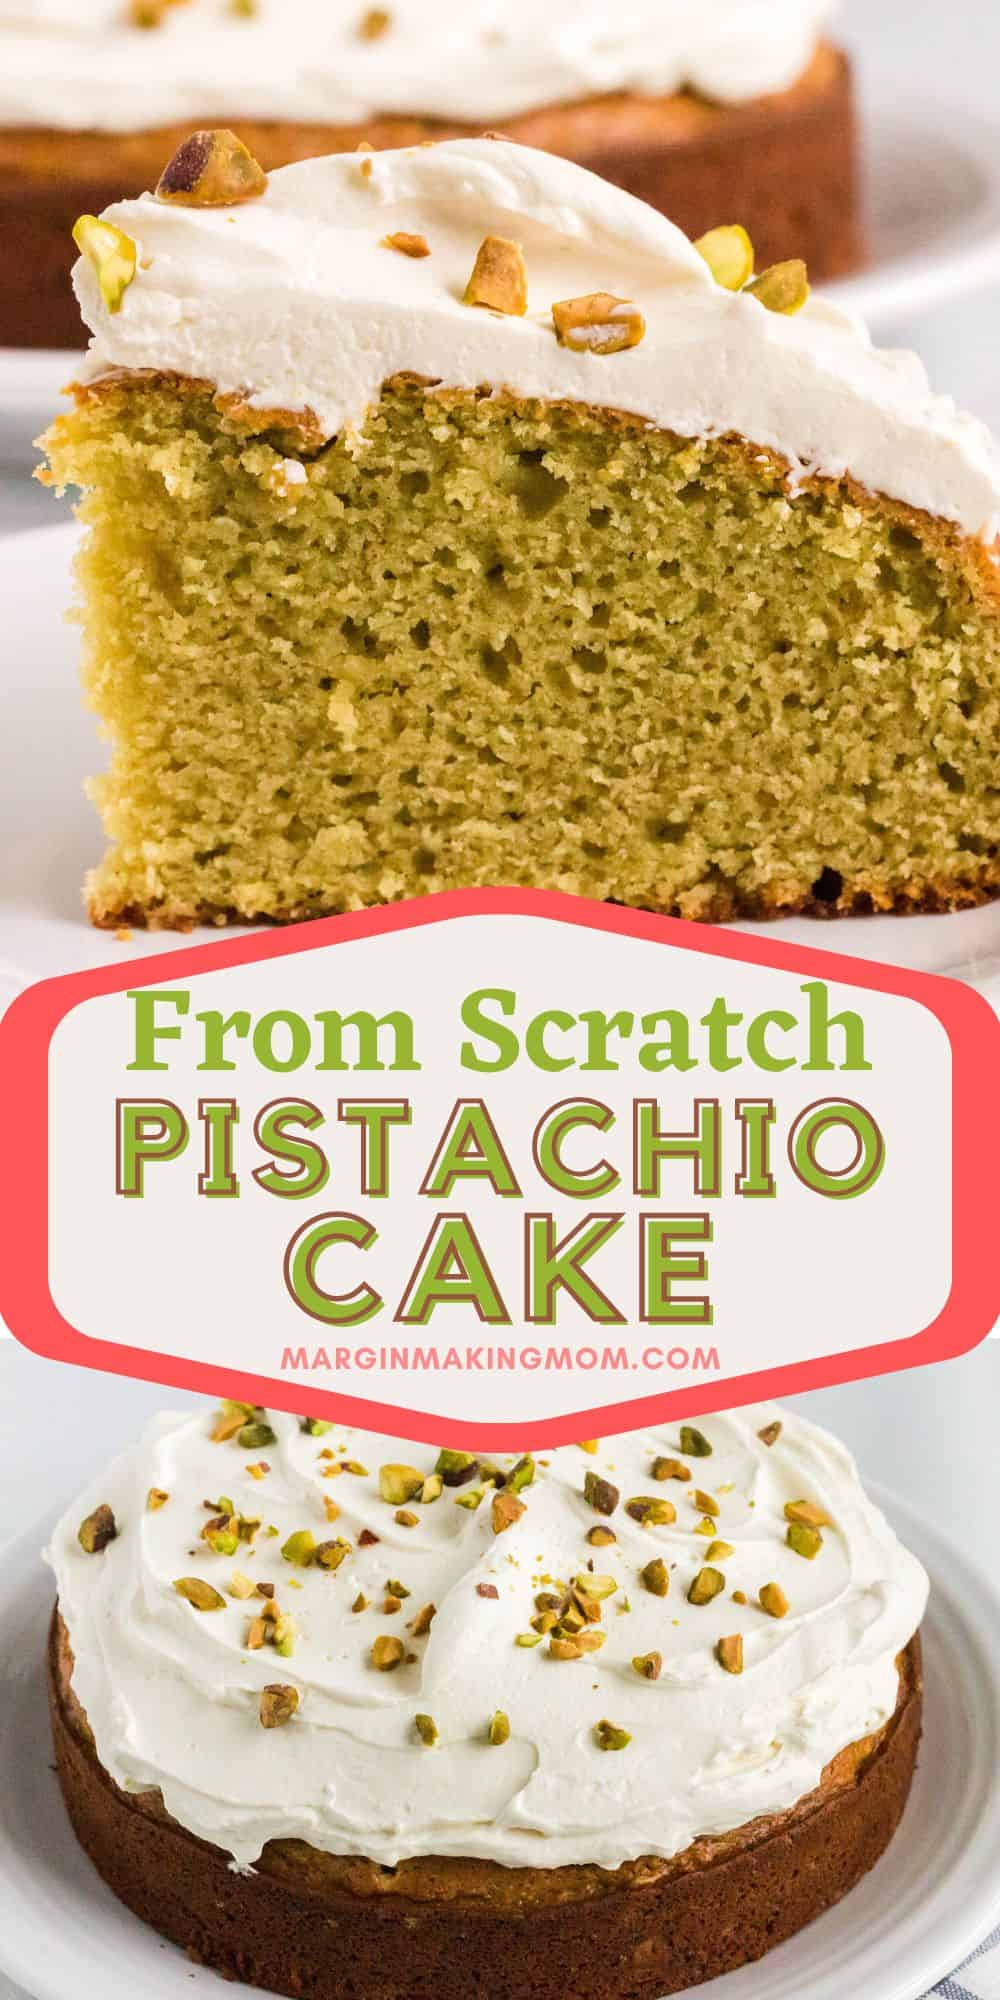 two photos; one shows a slice of italian pistachio cake from the side, demonstrating its moist and tender crumb. The other shows the whole cake, topped with whipped mascarpone frosting and garnished with chopped pistachios. An overlay reads, "From Scratch Pistachio Cake."